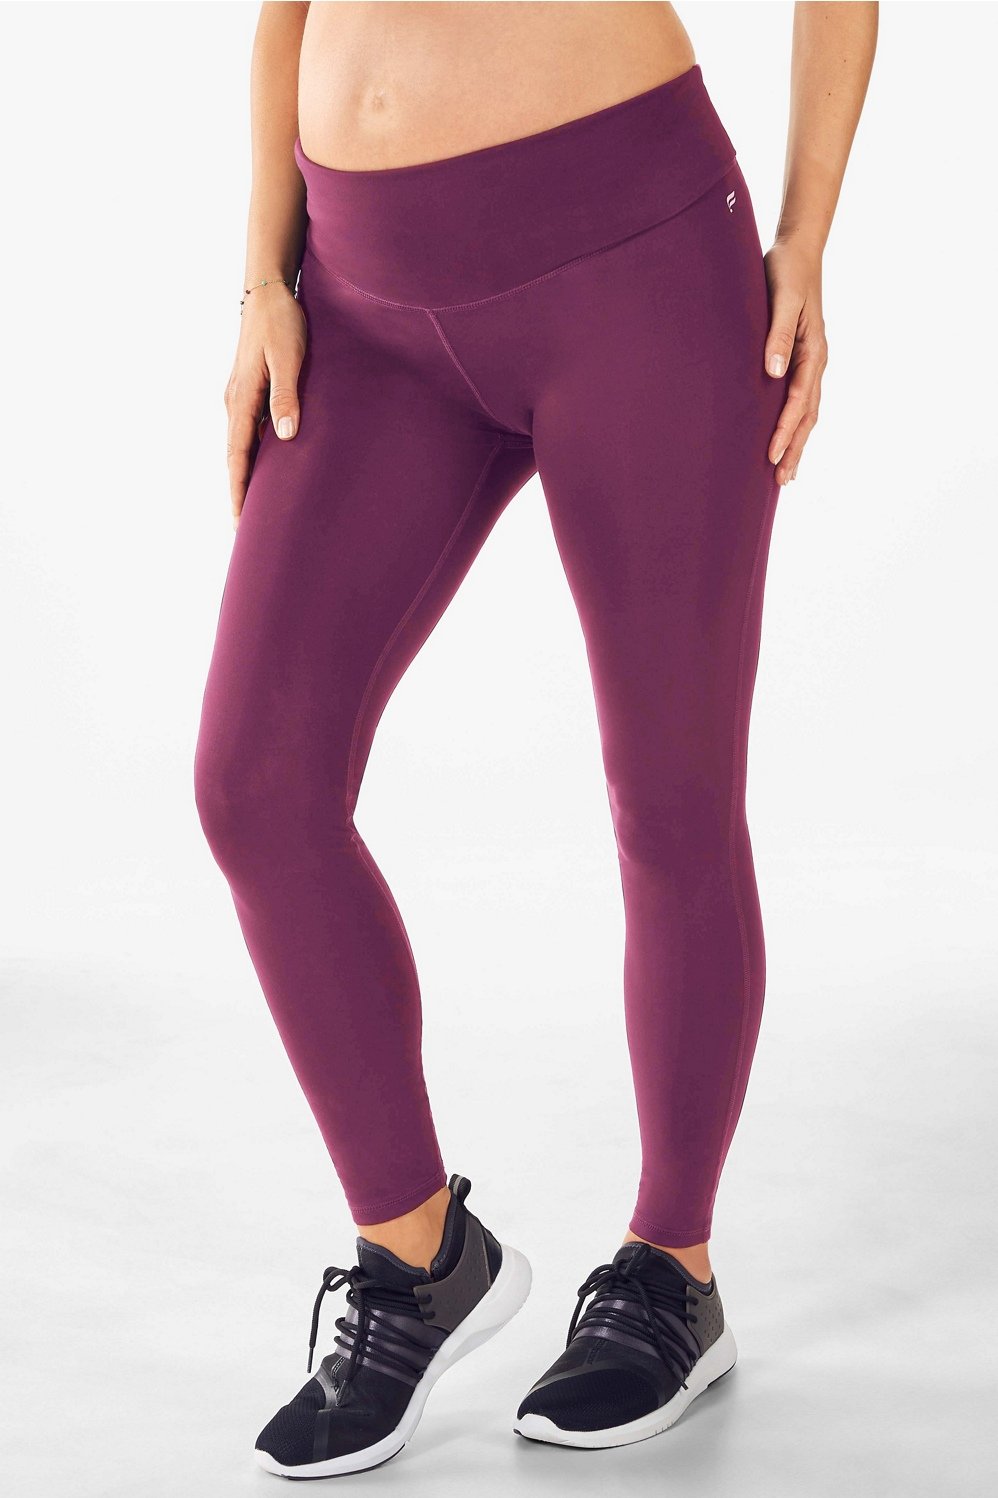 Fabletics pocket maternity leggings available Price 15000 Size